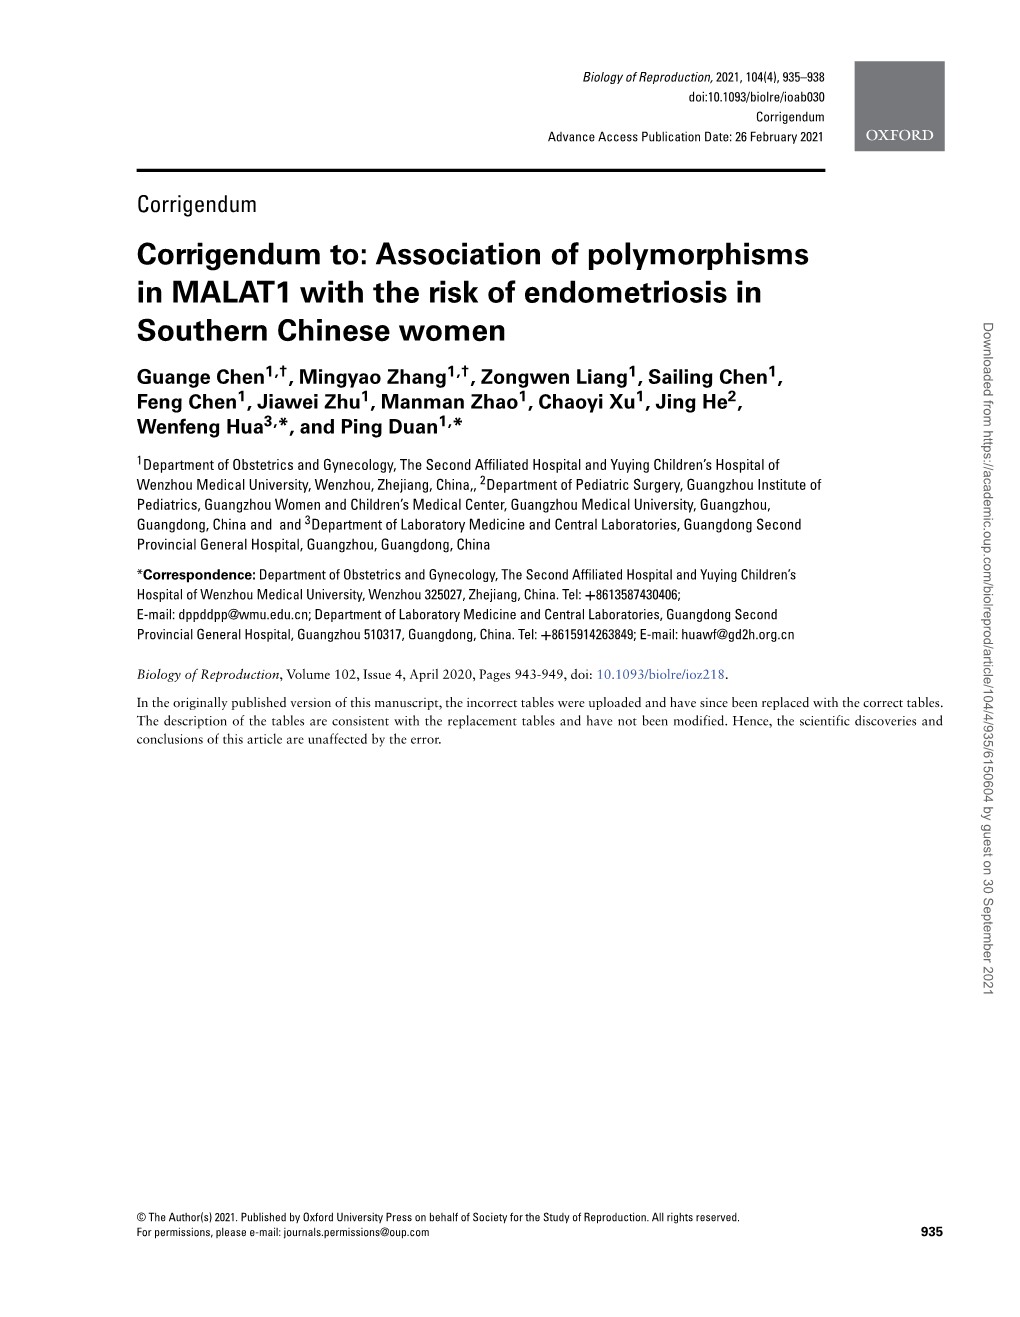 Corrigendum To: Association of Polymorphisms in MALAT1 with The